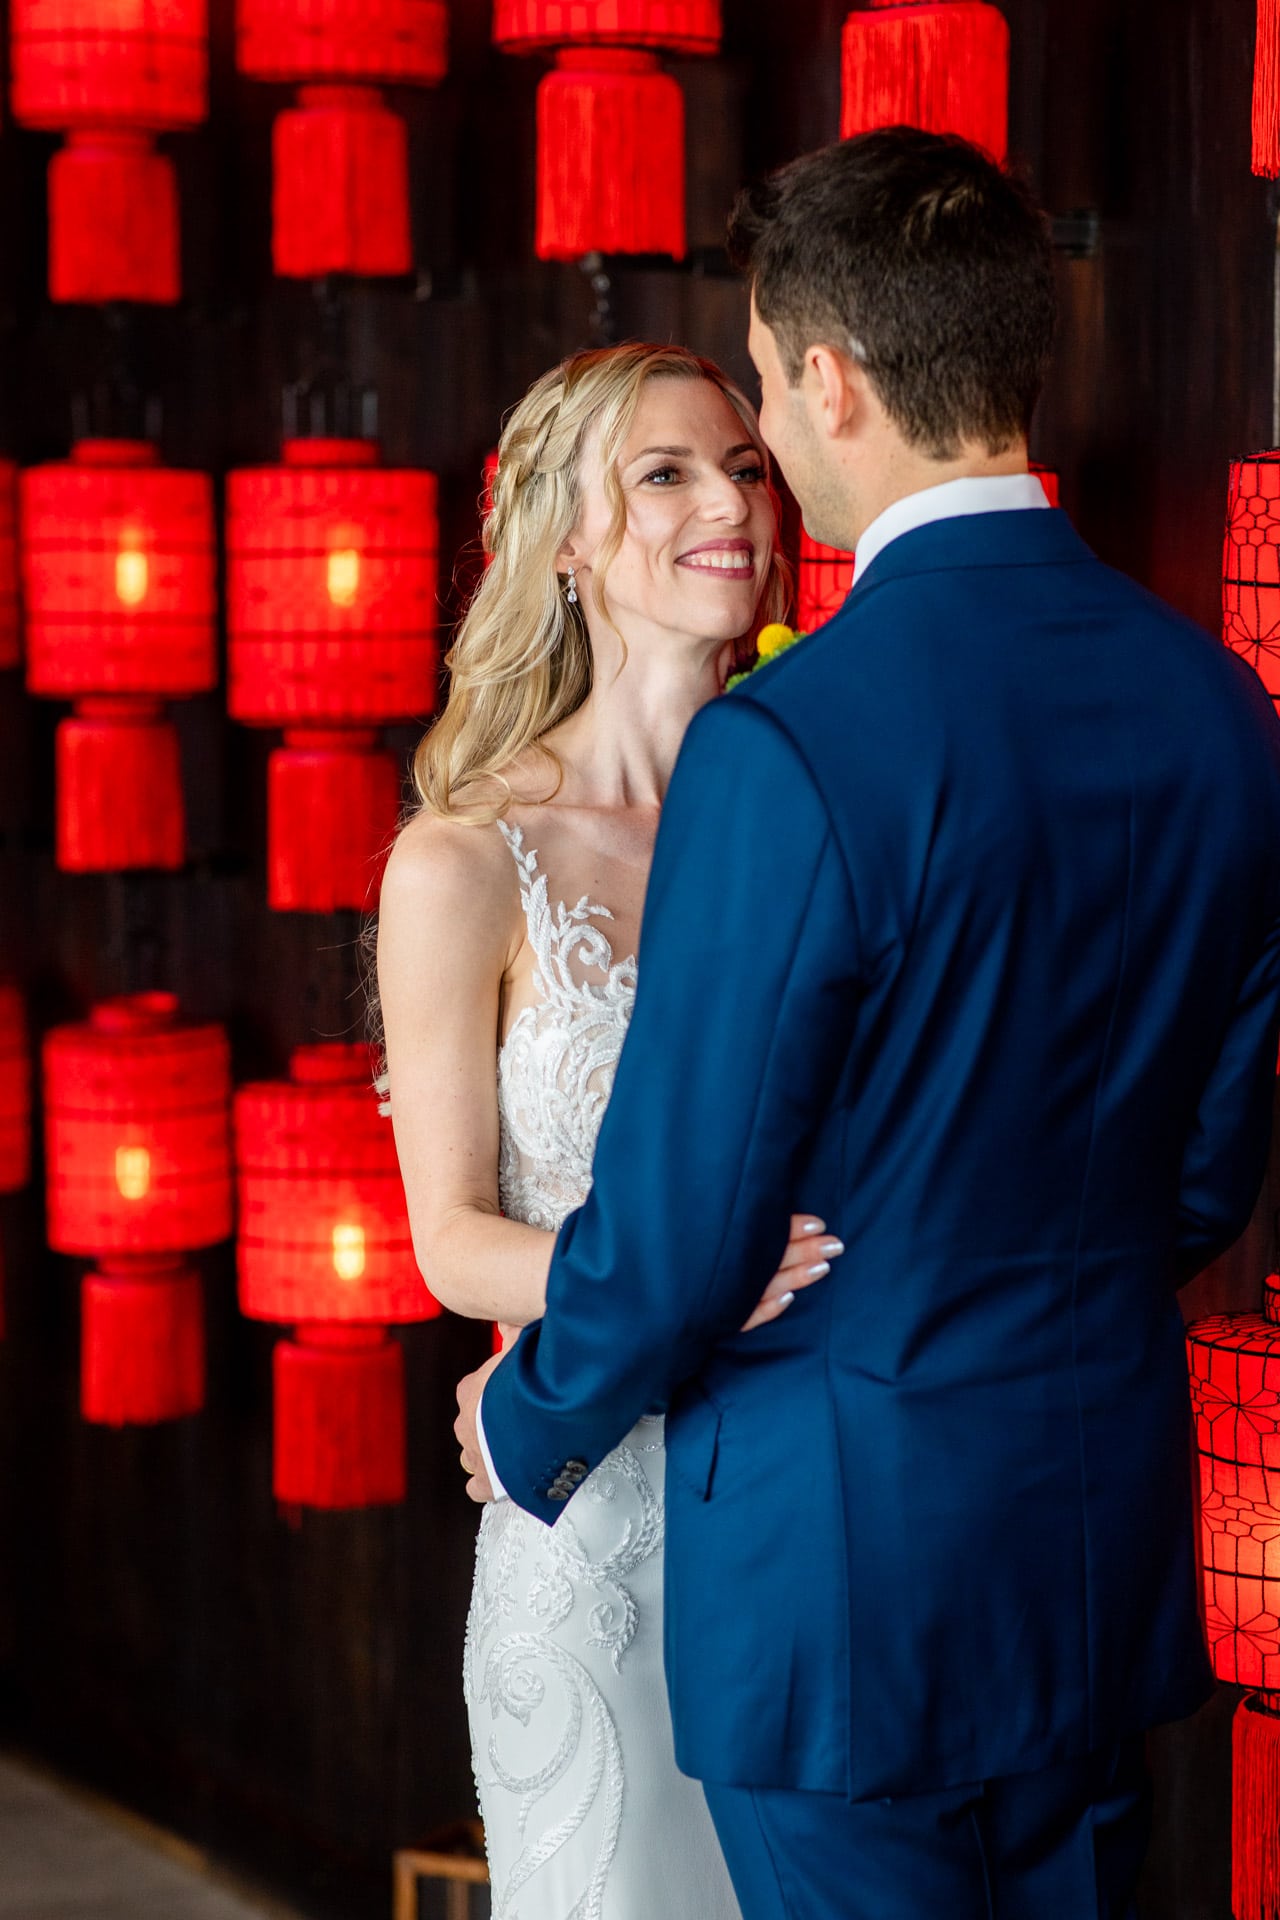 weddings by red chinese lanterns